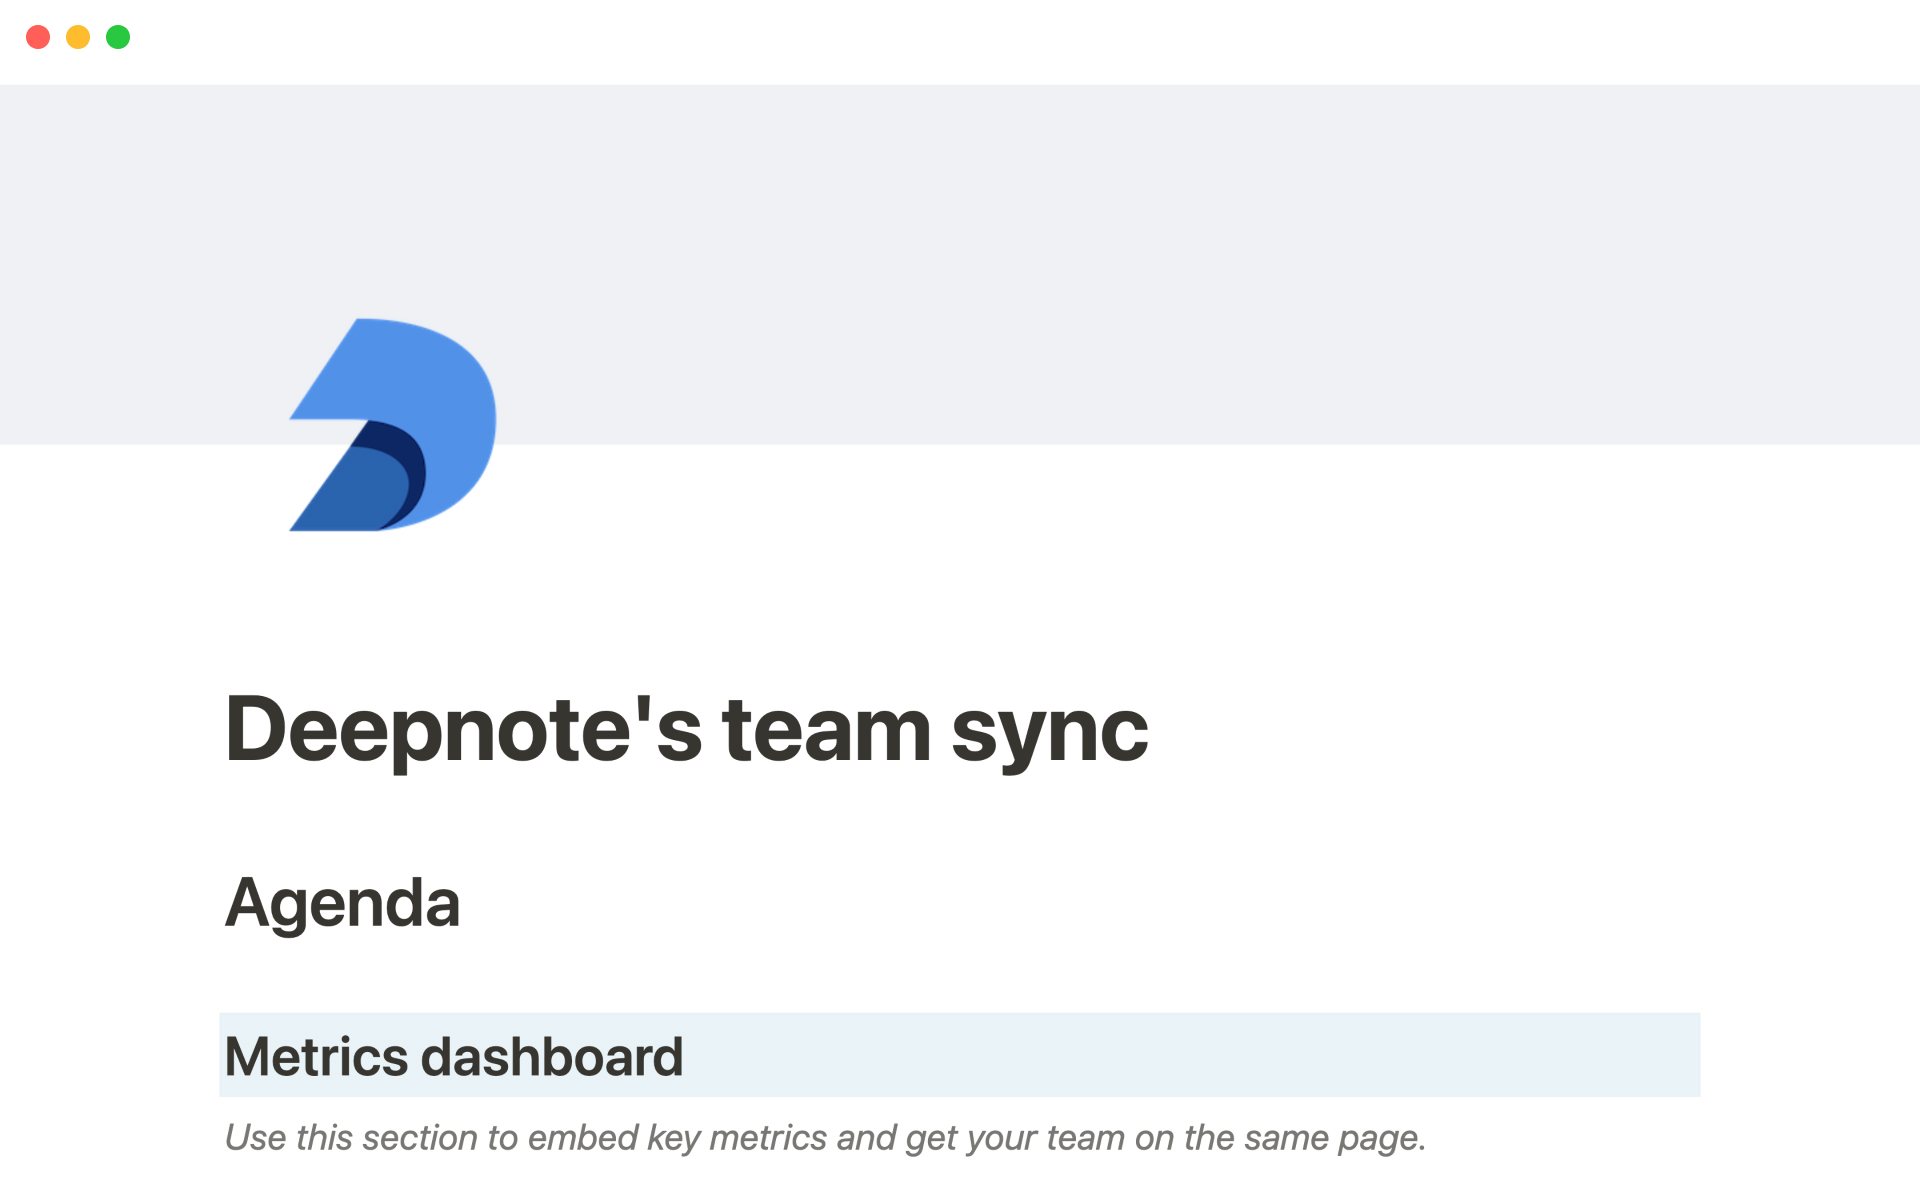 Build dashboards, capture metrics, discussion points and everything else you need for a productive team sync.